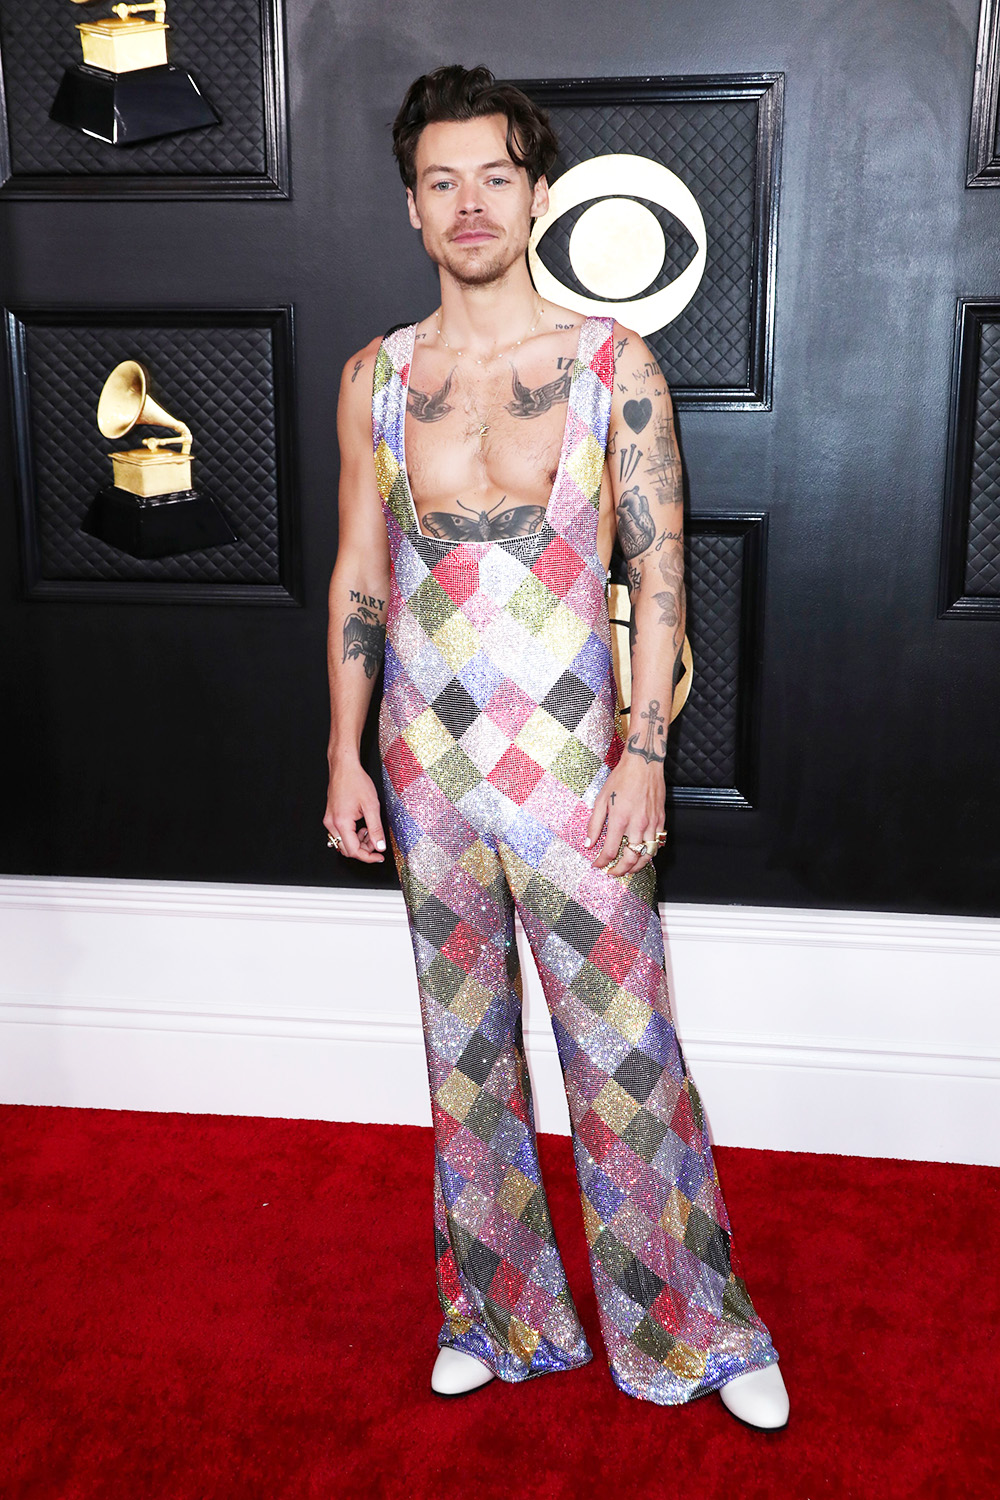 Harry Styles wore this bright colored sequin patterned Egonlab jumpsuit with no shirt underneath at the 2023 Grammy Awards